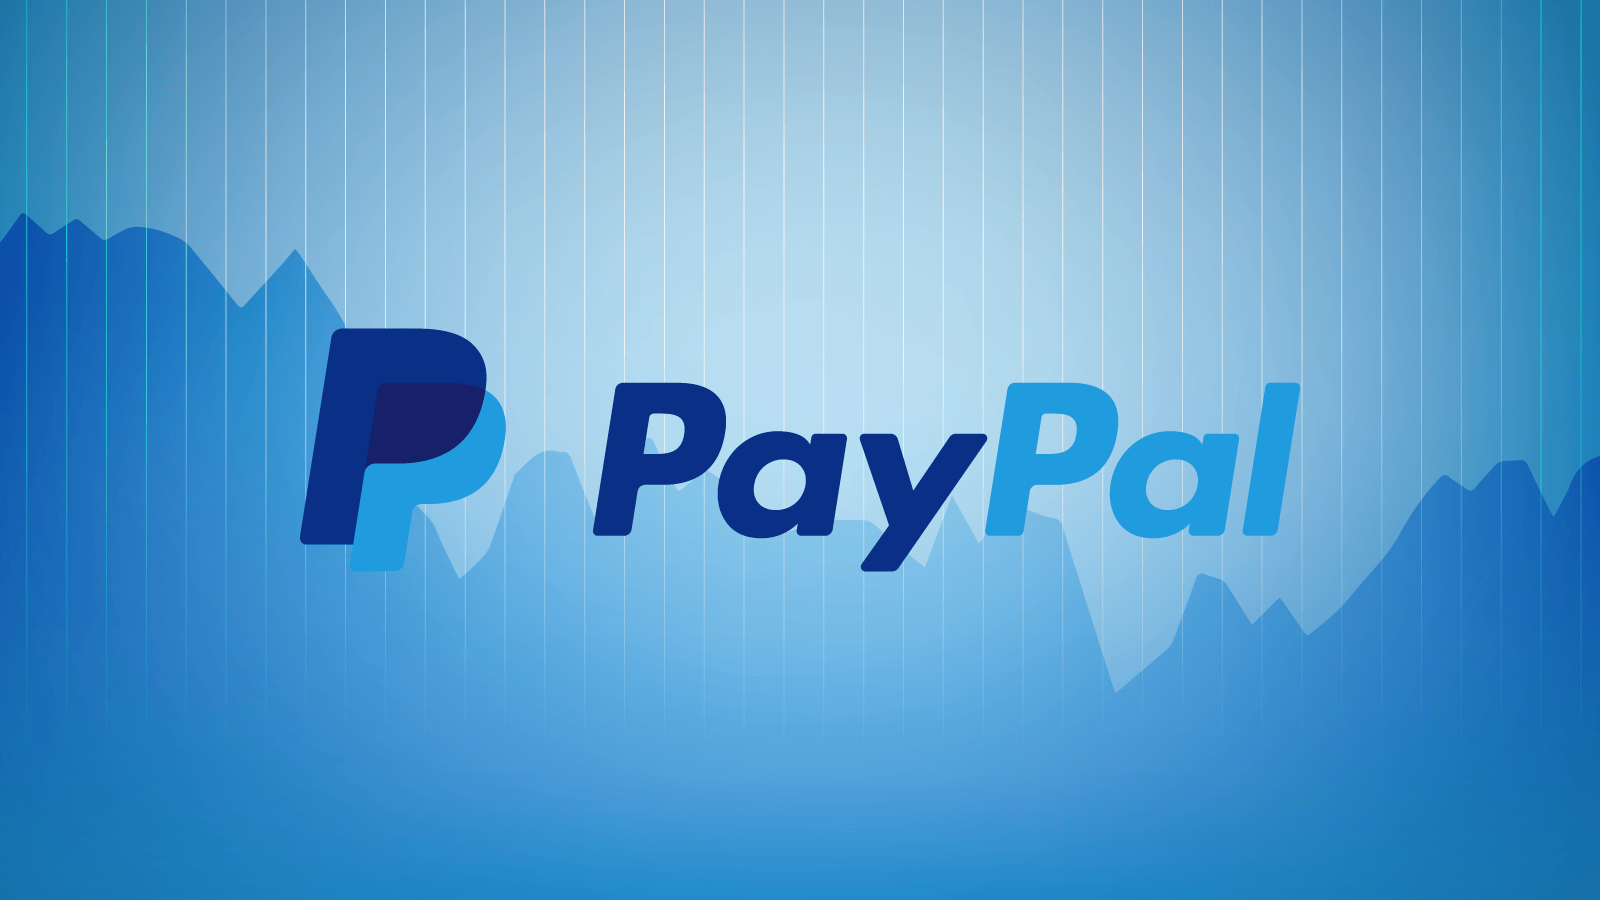 HD PayPal Verified Logo - Complete Process For PayPal Verification. PayPal Account Not Verified